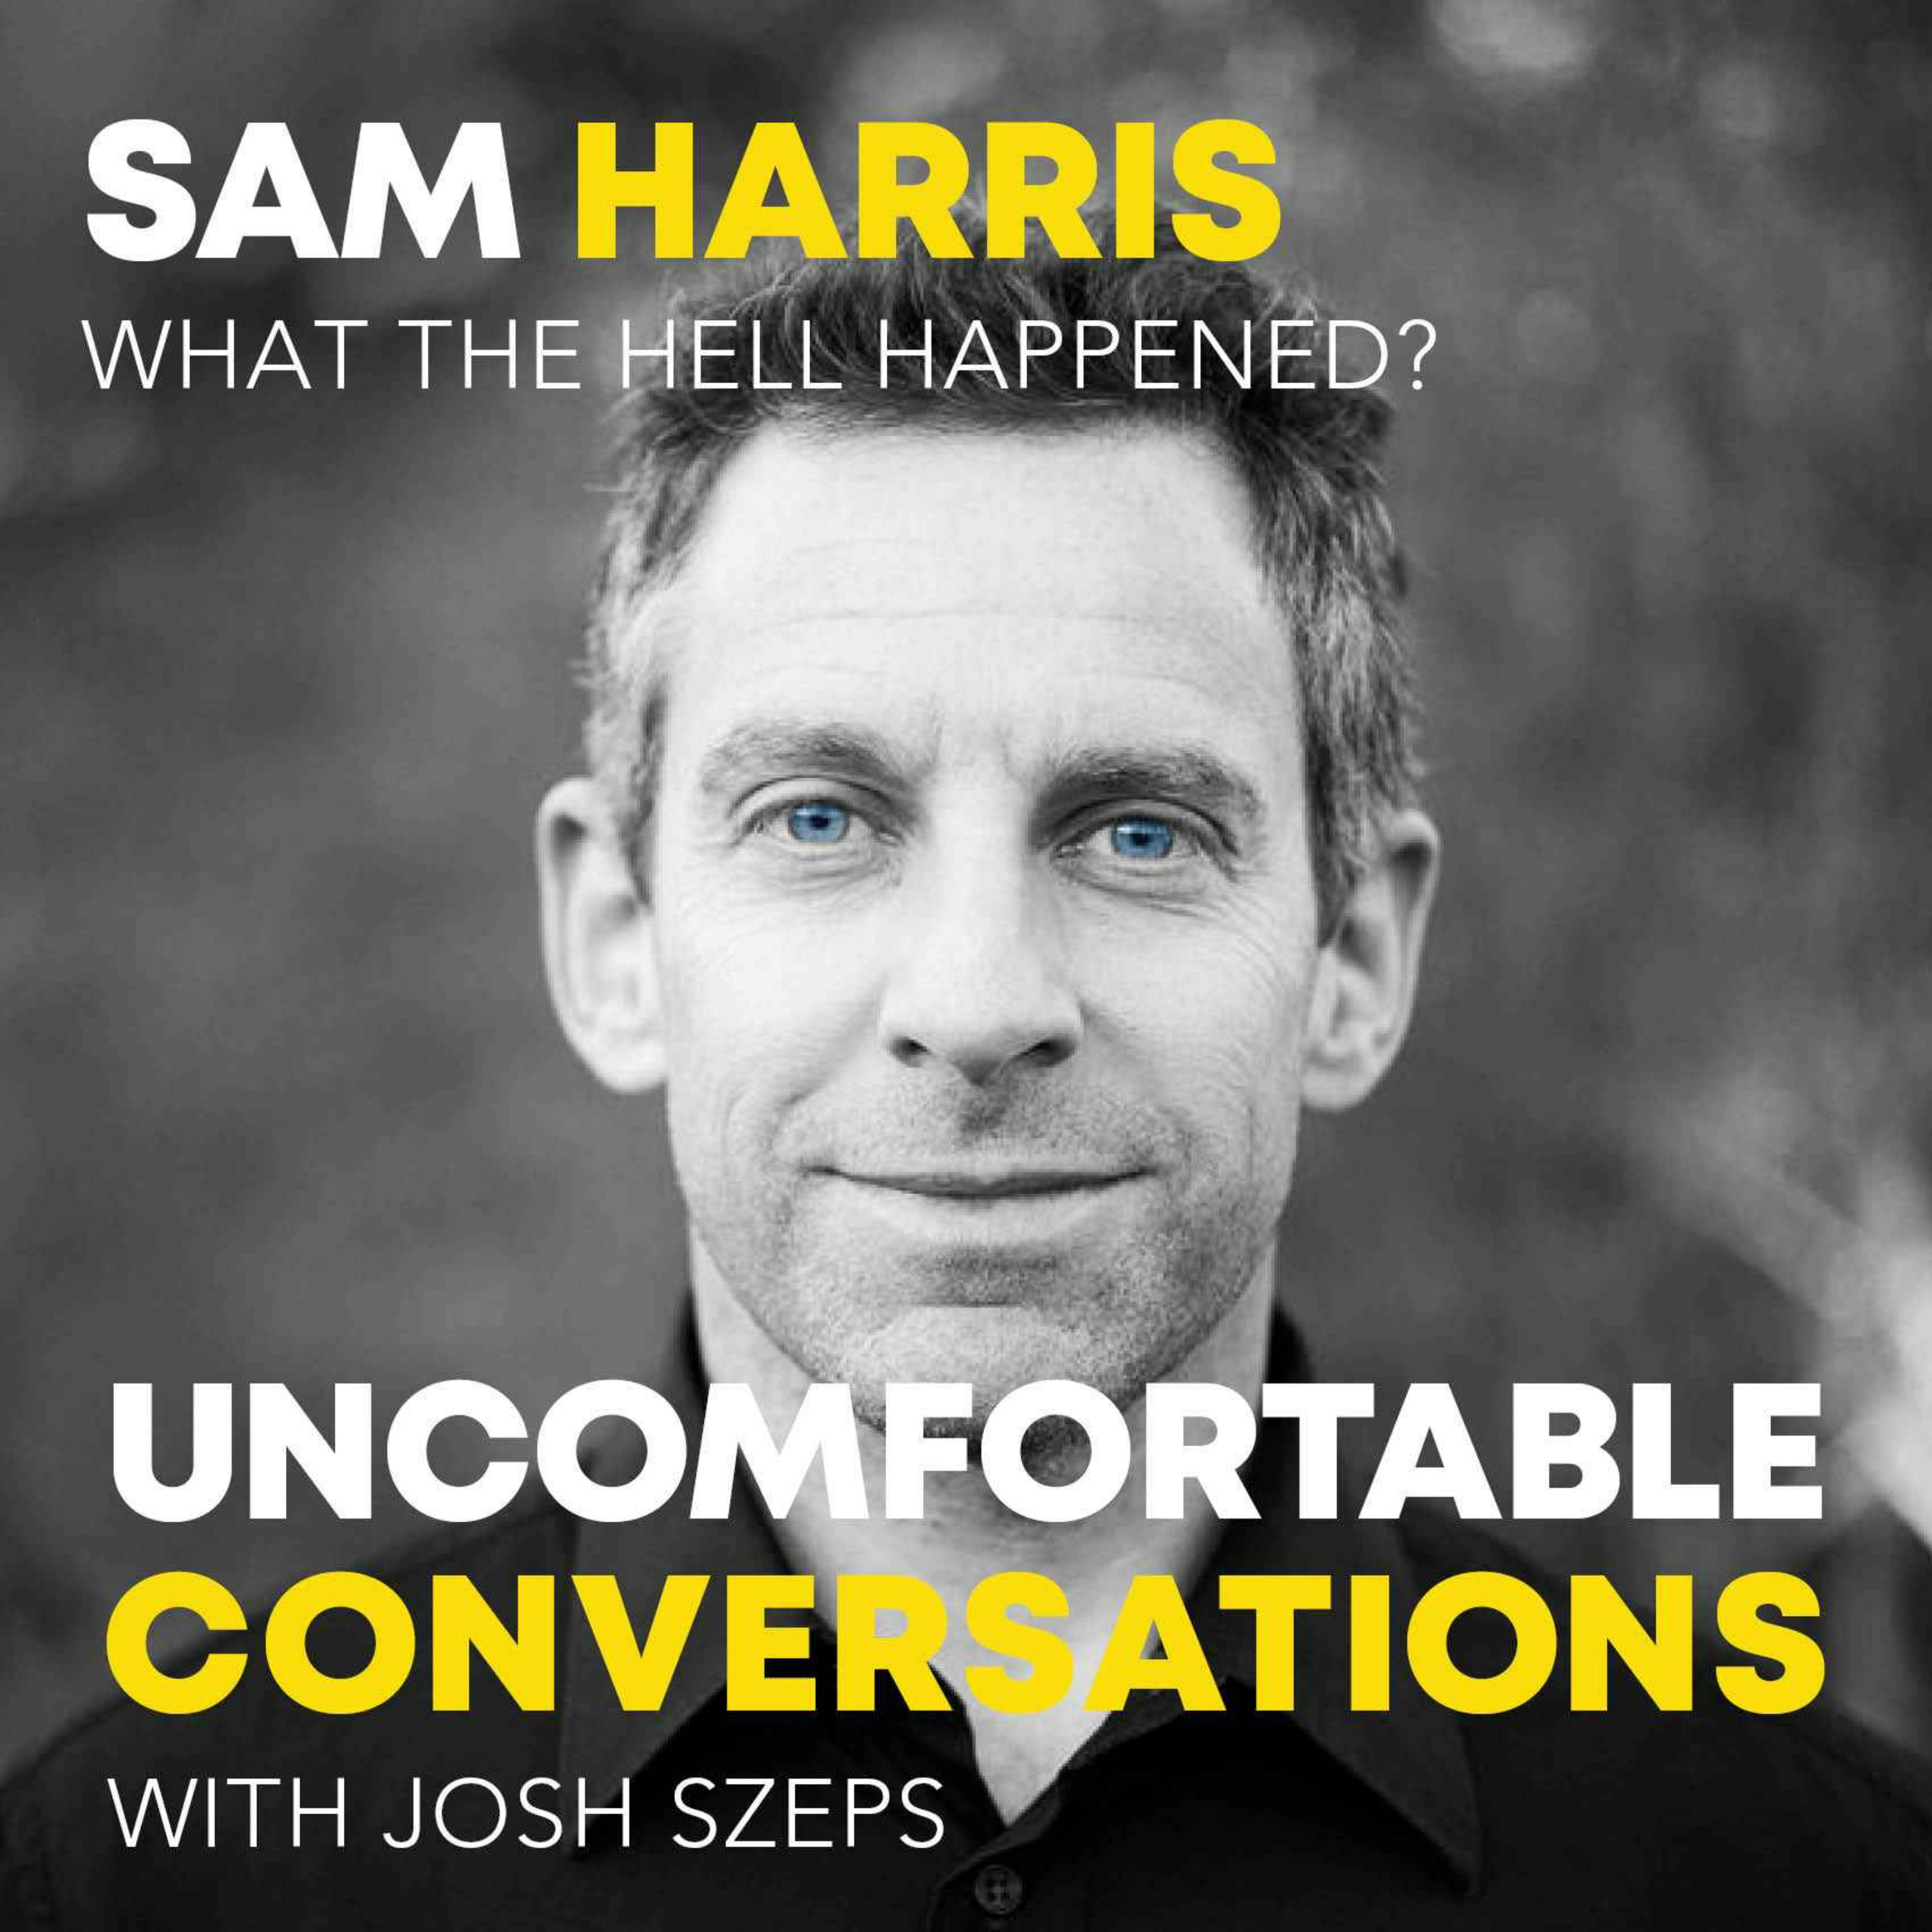 Sam Harris: What The Hell Happened?